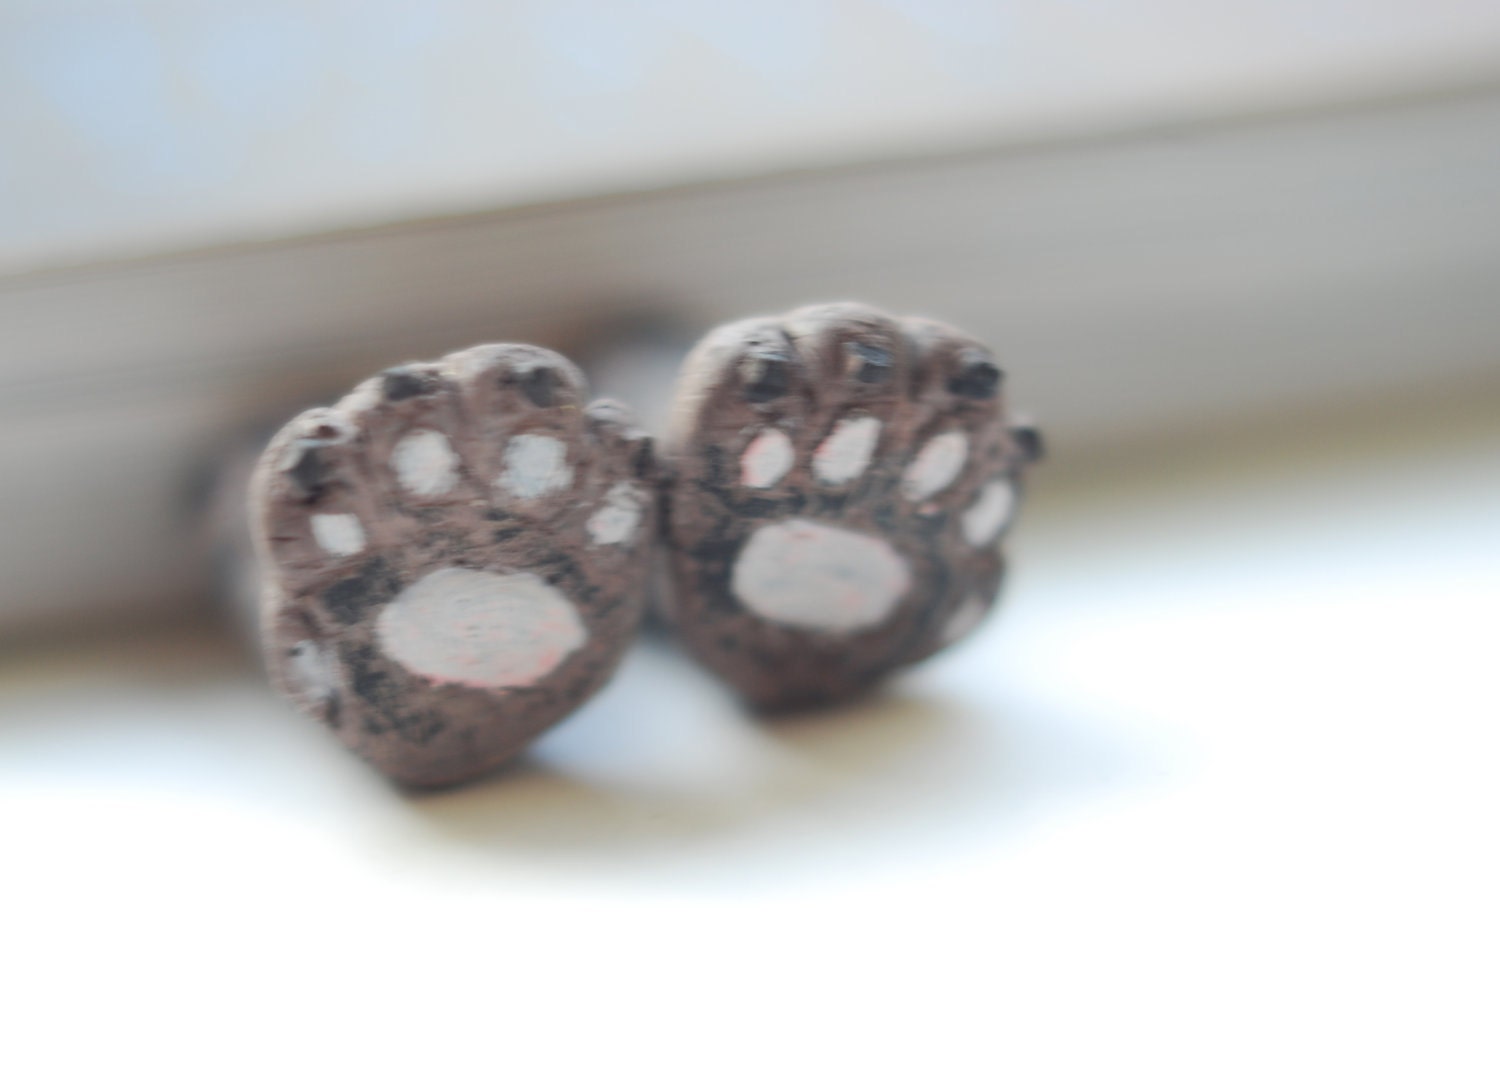 Cats paws in the book. Unusual art bookmark, halloween gift idea